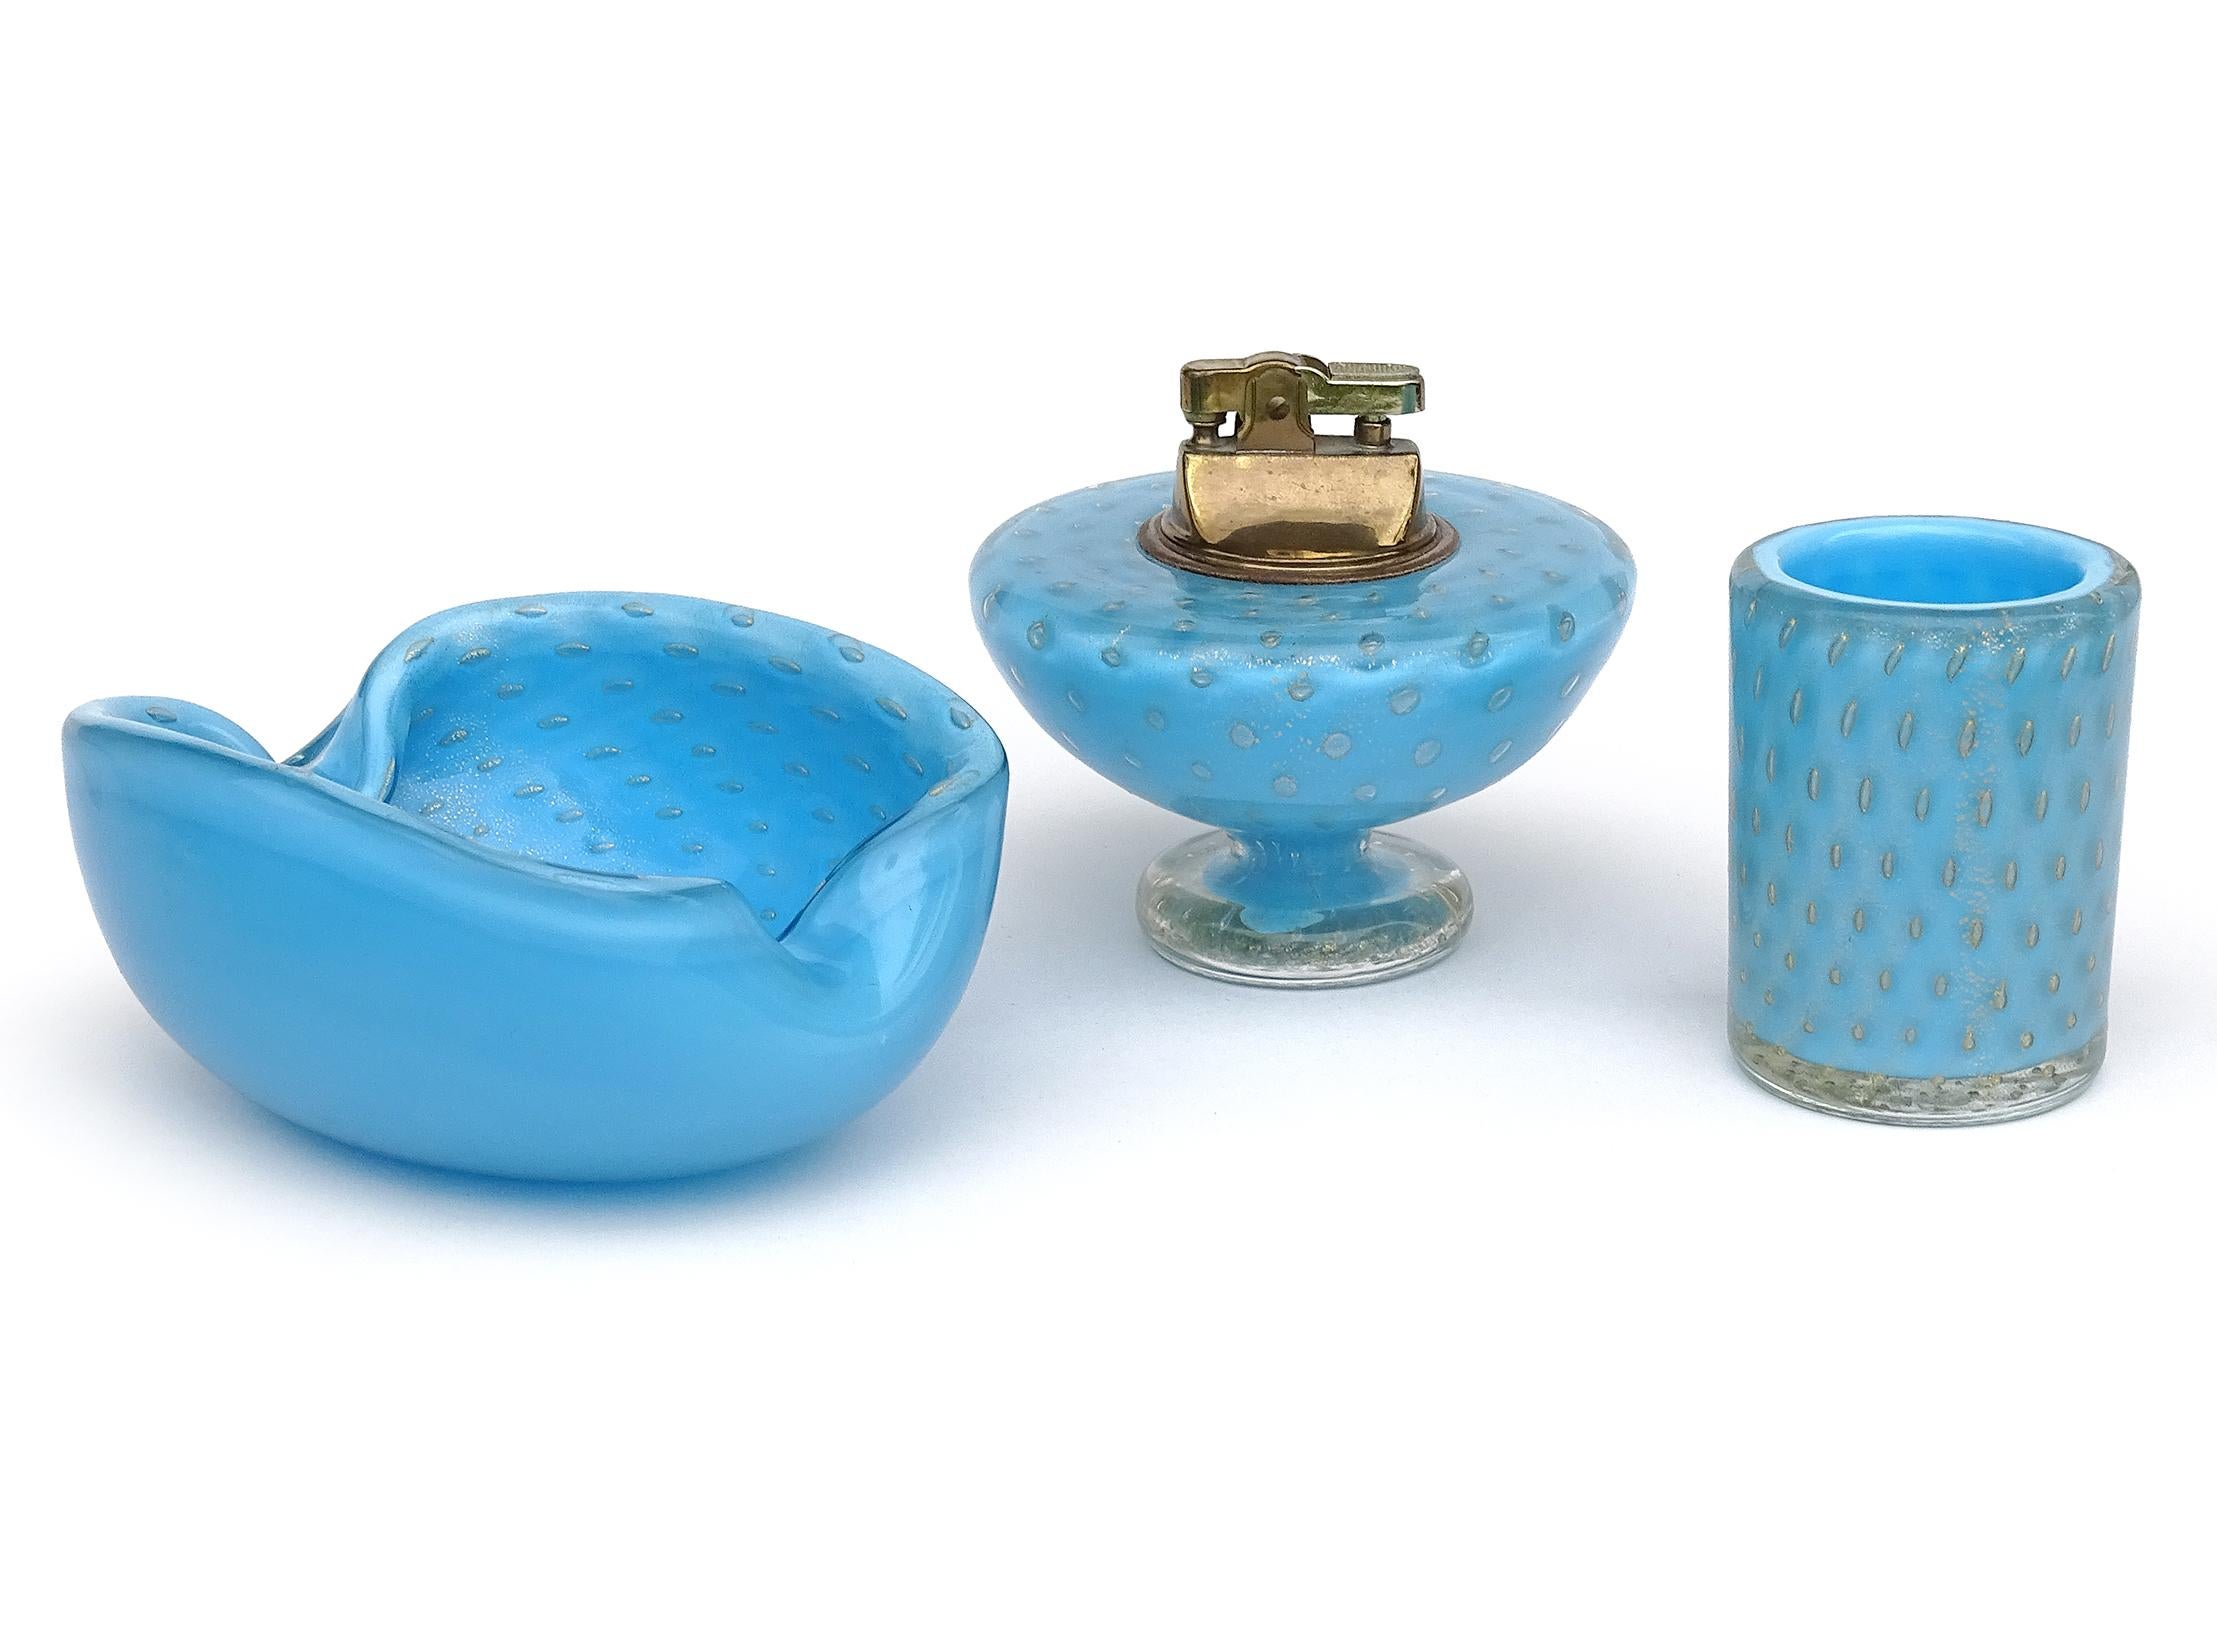 Beautiful vintage Murano hand blown blue, controlled bubbles and gold flecks Italian art glass ashtray / vide poche, lighter and cigarette holder. Documented to designer Alfredo Barbini, circa 1950s. The set is published in his Weil Ceramics and